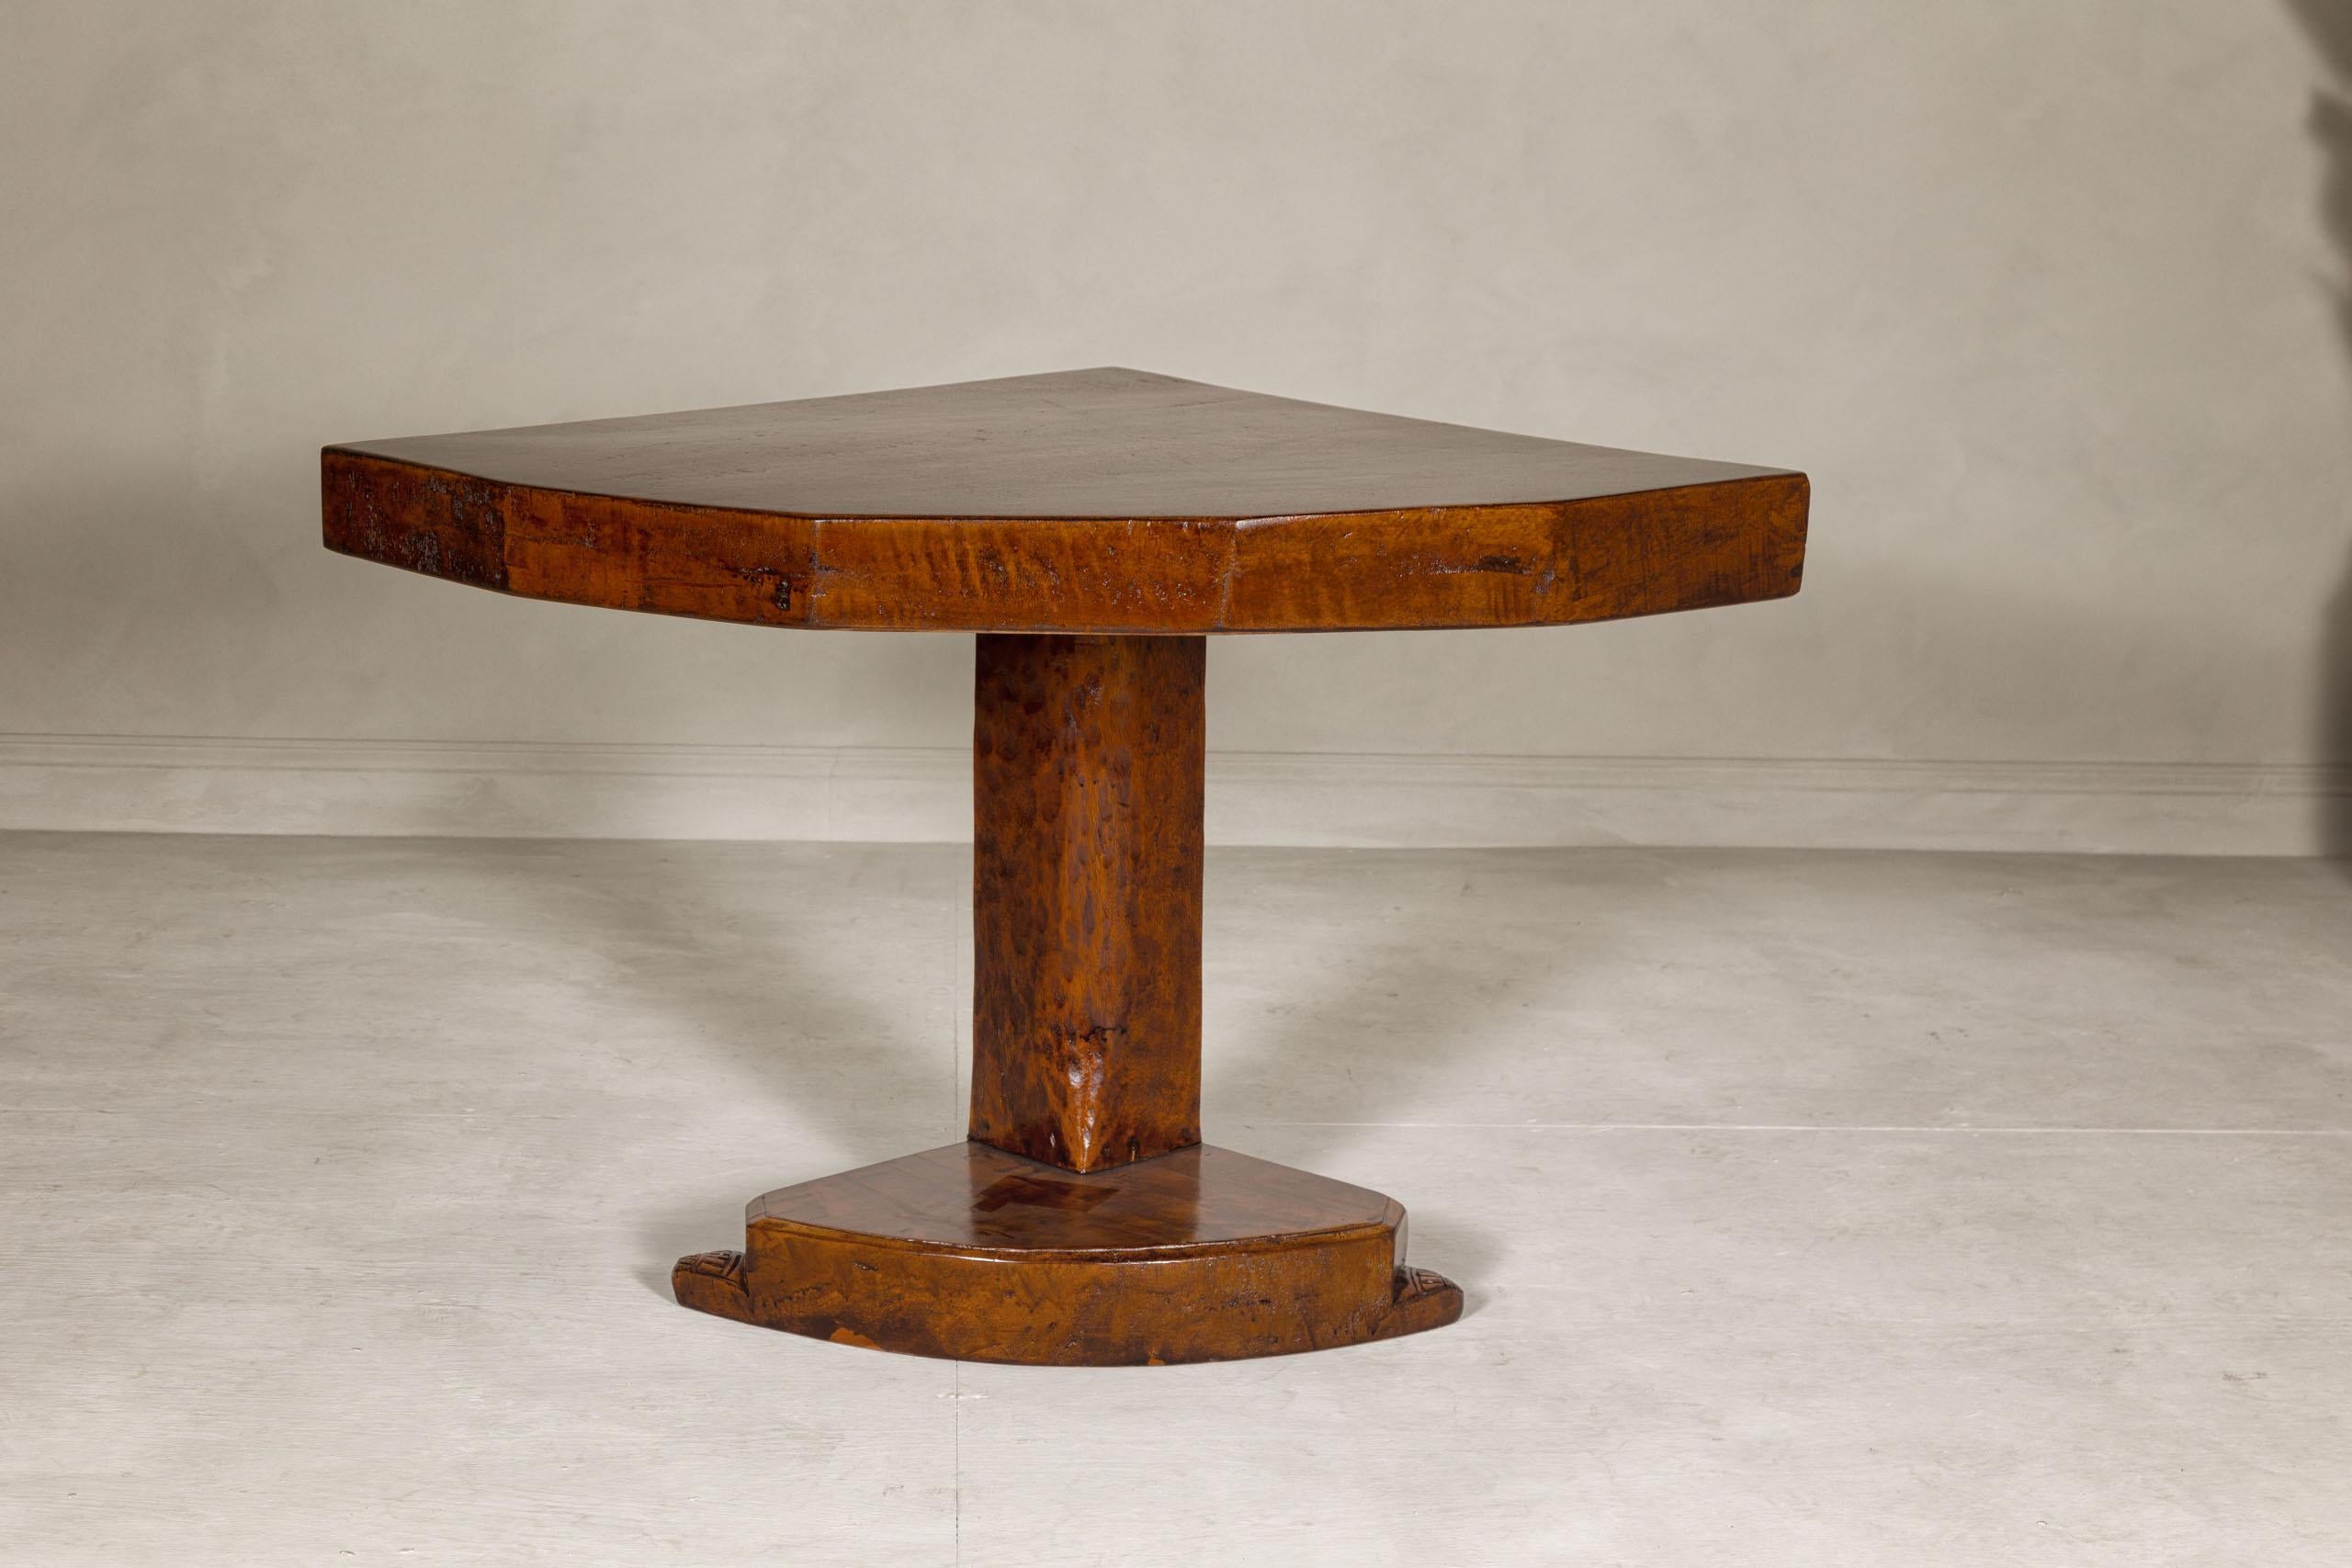 An unusual vintage corner demi-lune table from the mid 20th century with delicately carved base. Embrace the subtle elegance of this mid-20th-century vintage corner demi-lune table, a piece where functionality meets decorative finesse.